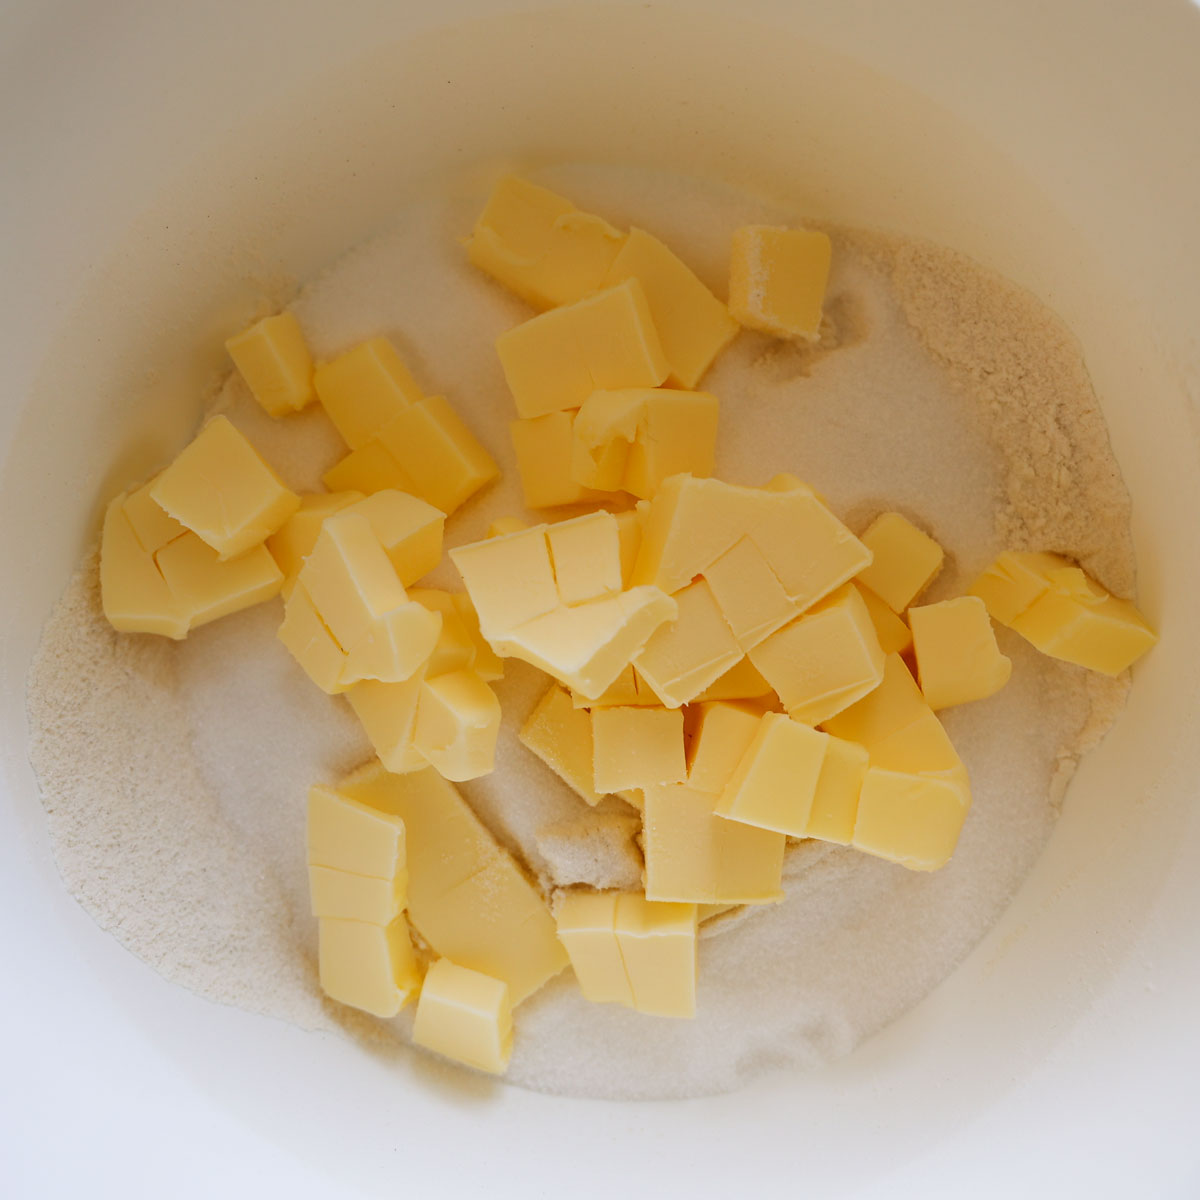 Flour, caster sugar and cubed butter in a mixing bowl.